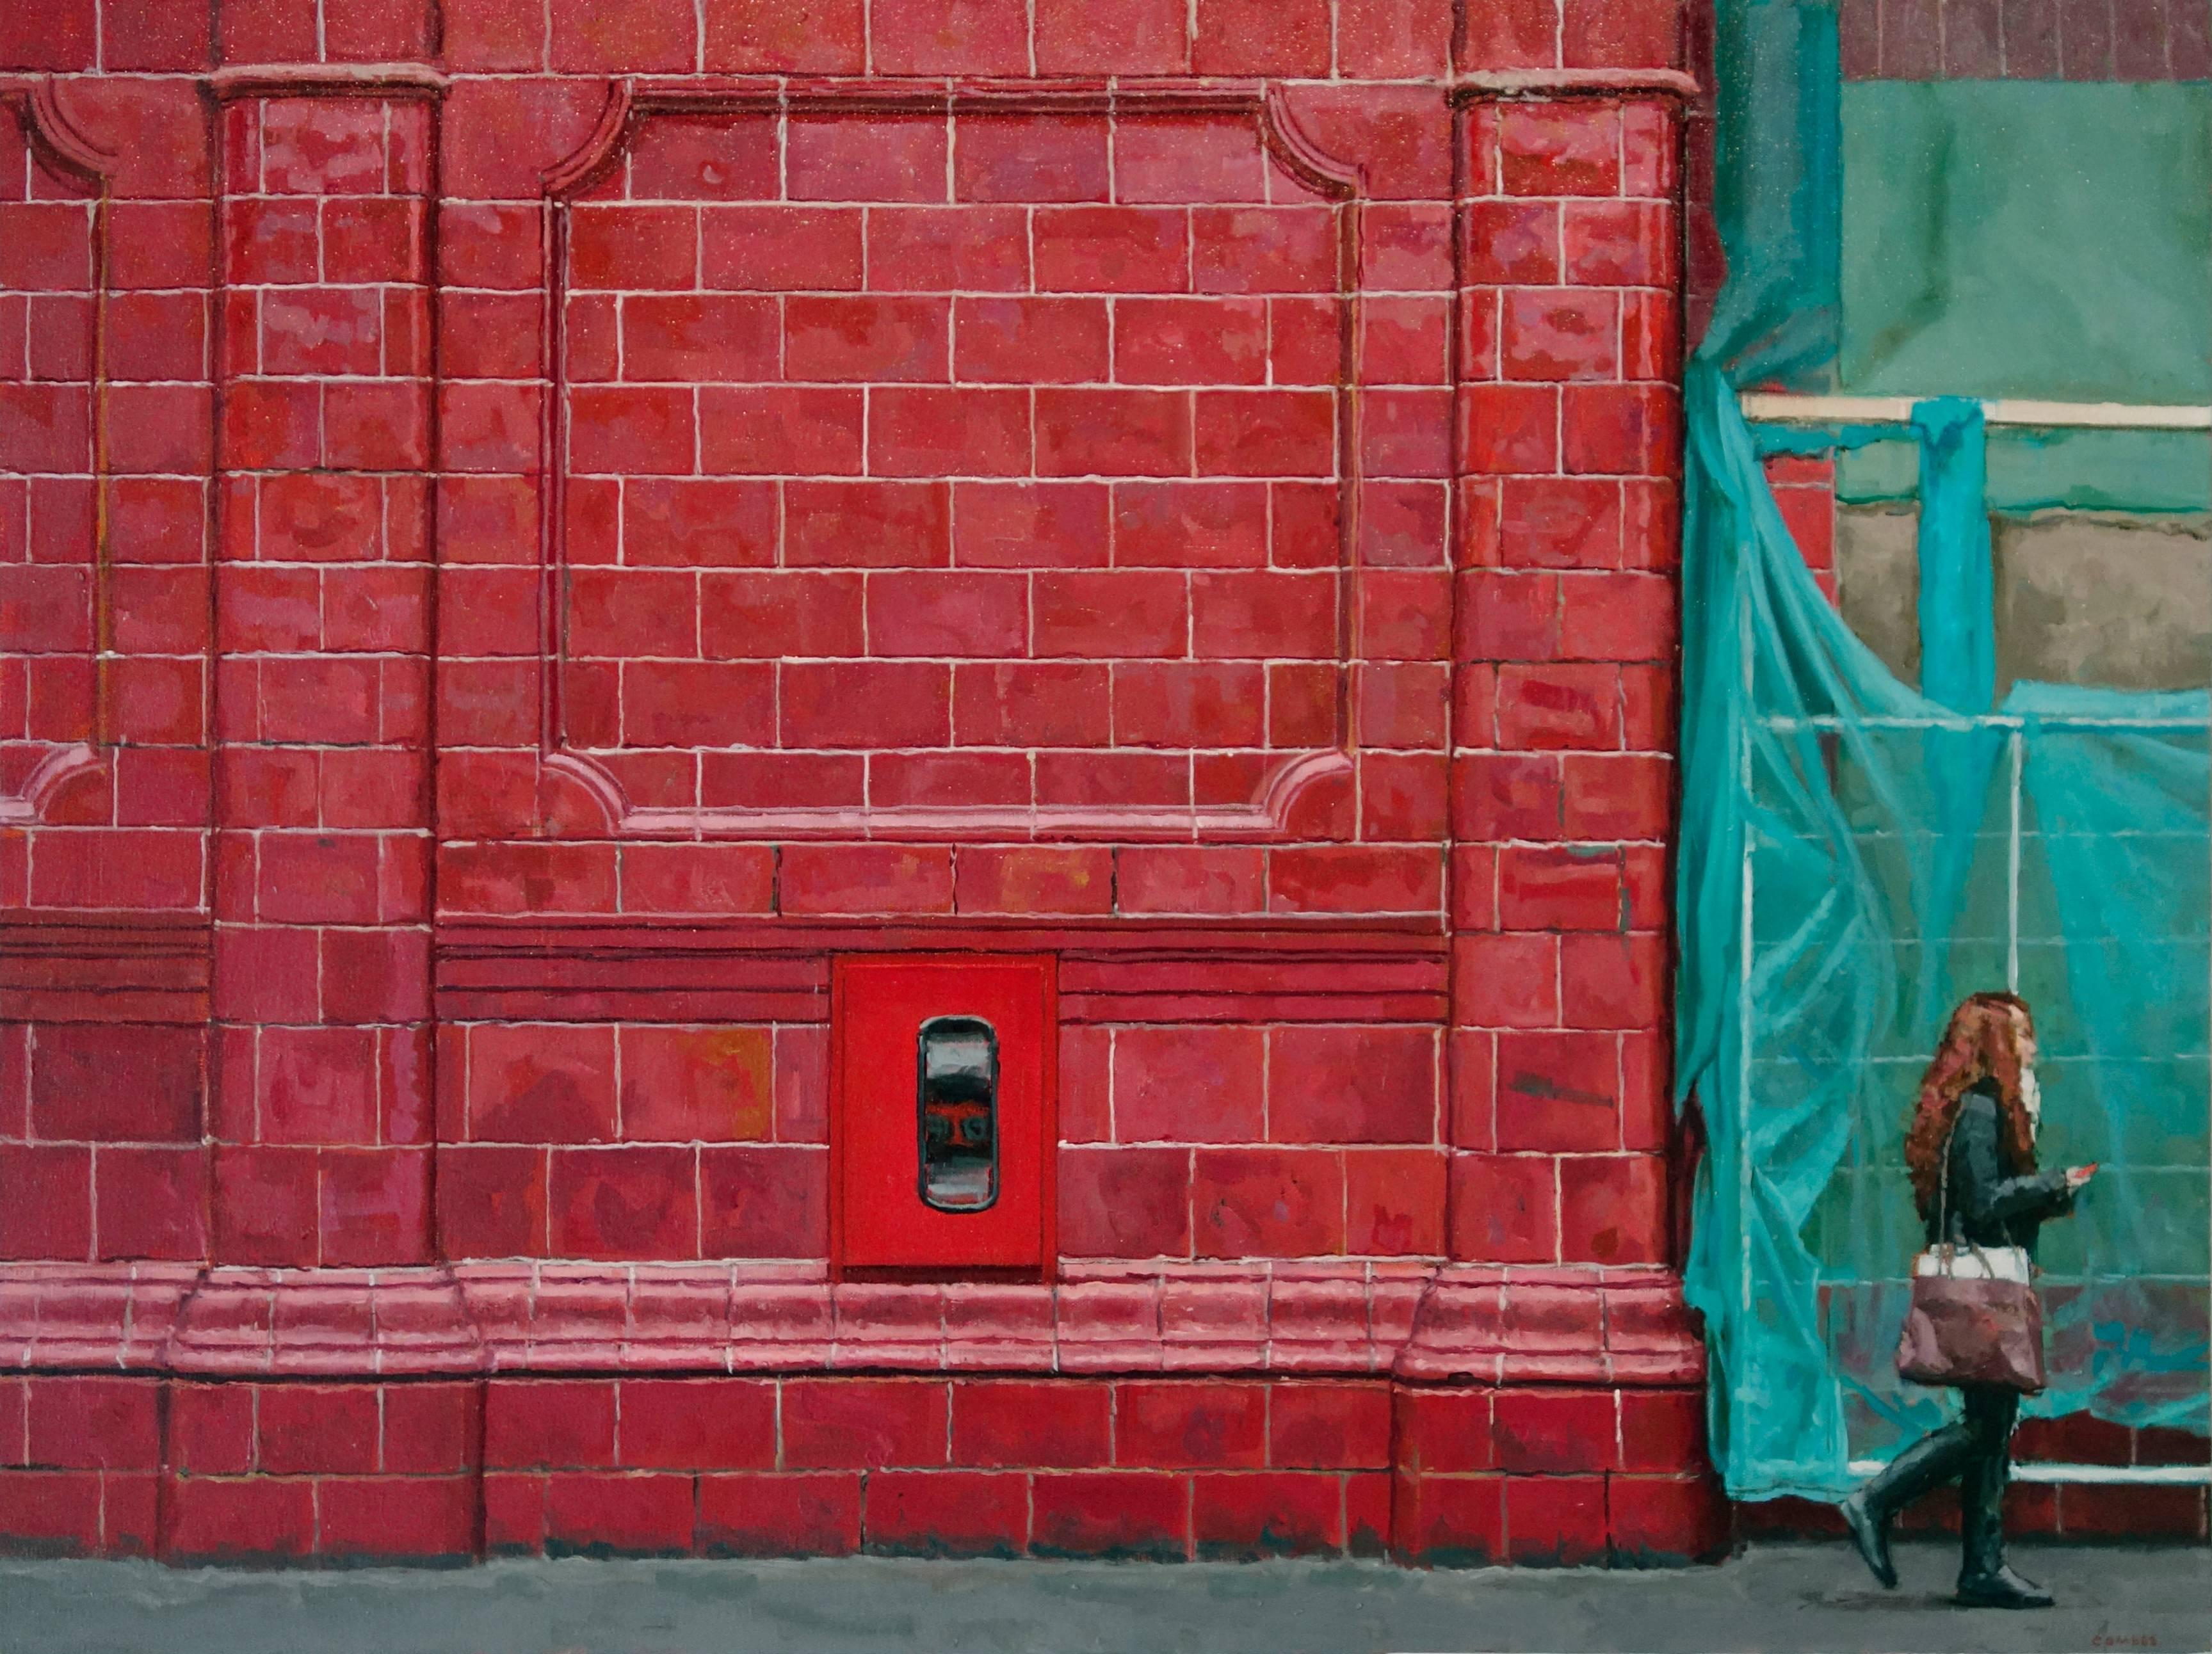 Richard Combes Landscape Painting - TERRACOTTA WALL, photo-realistic, bright red wall, green, women on the street